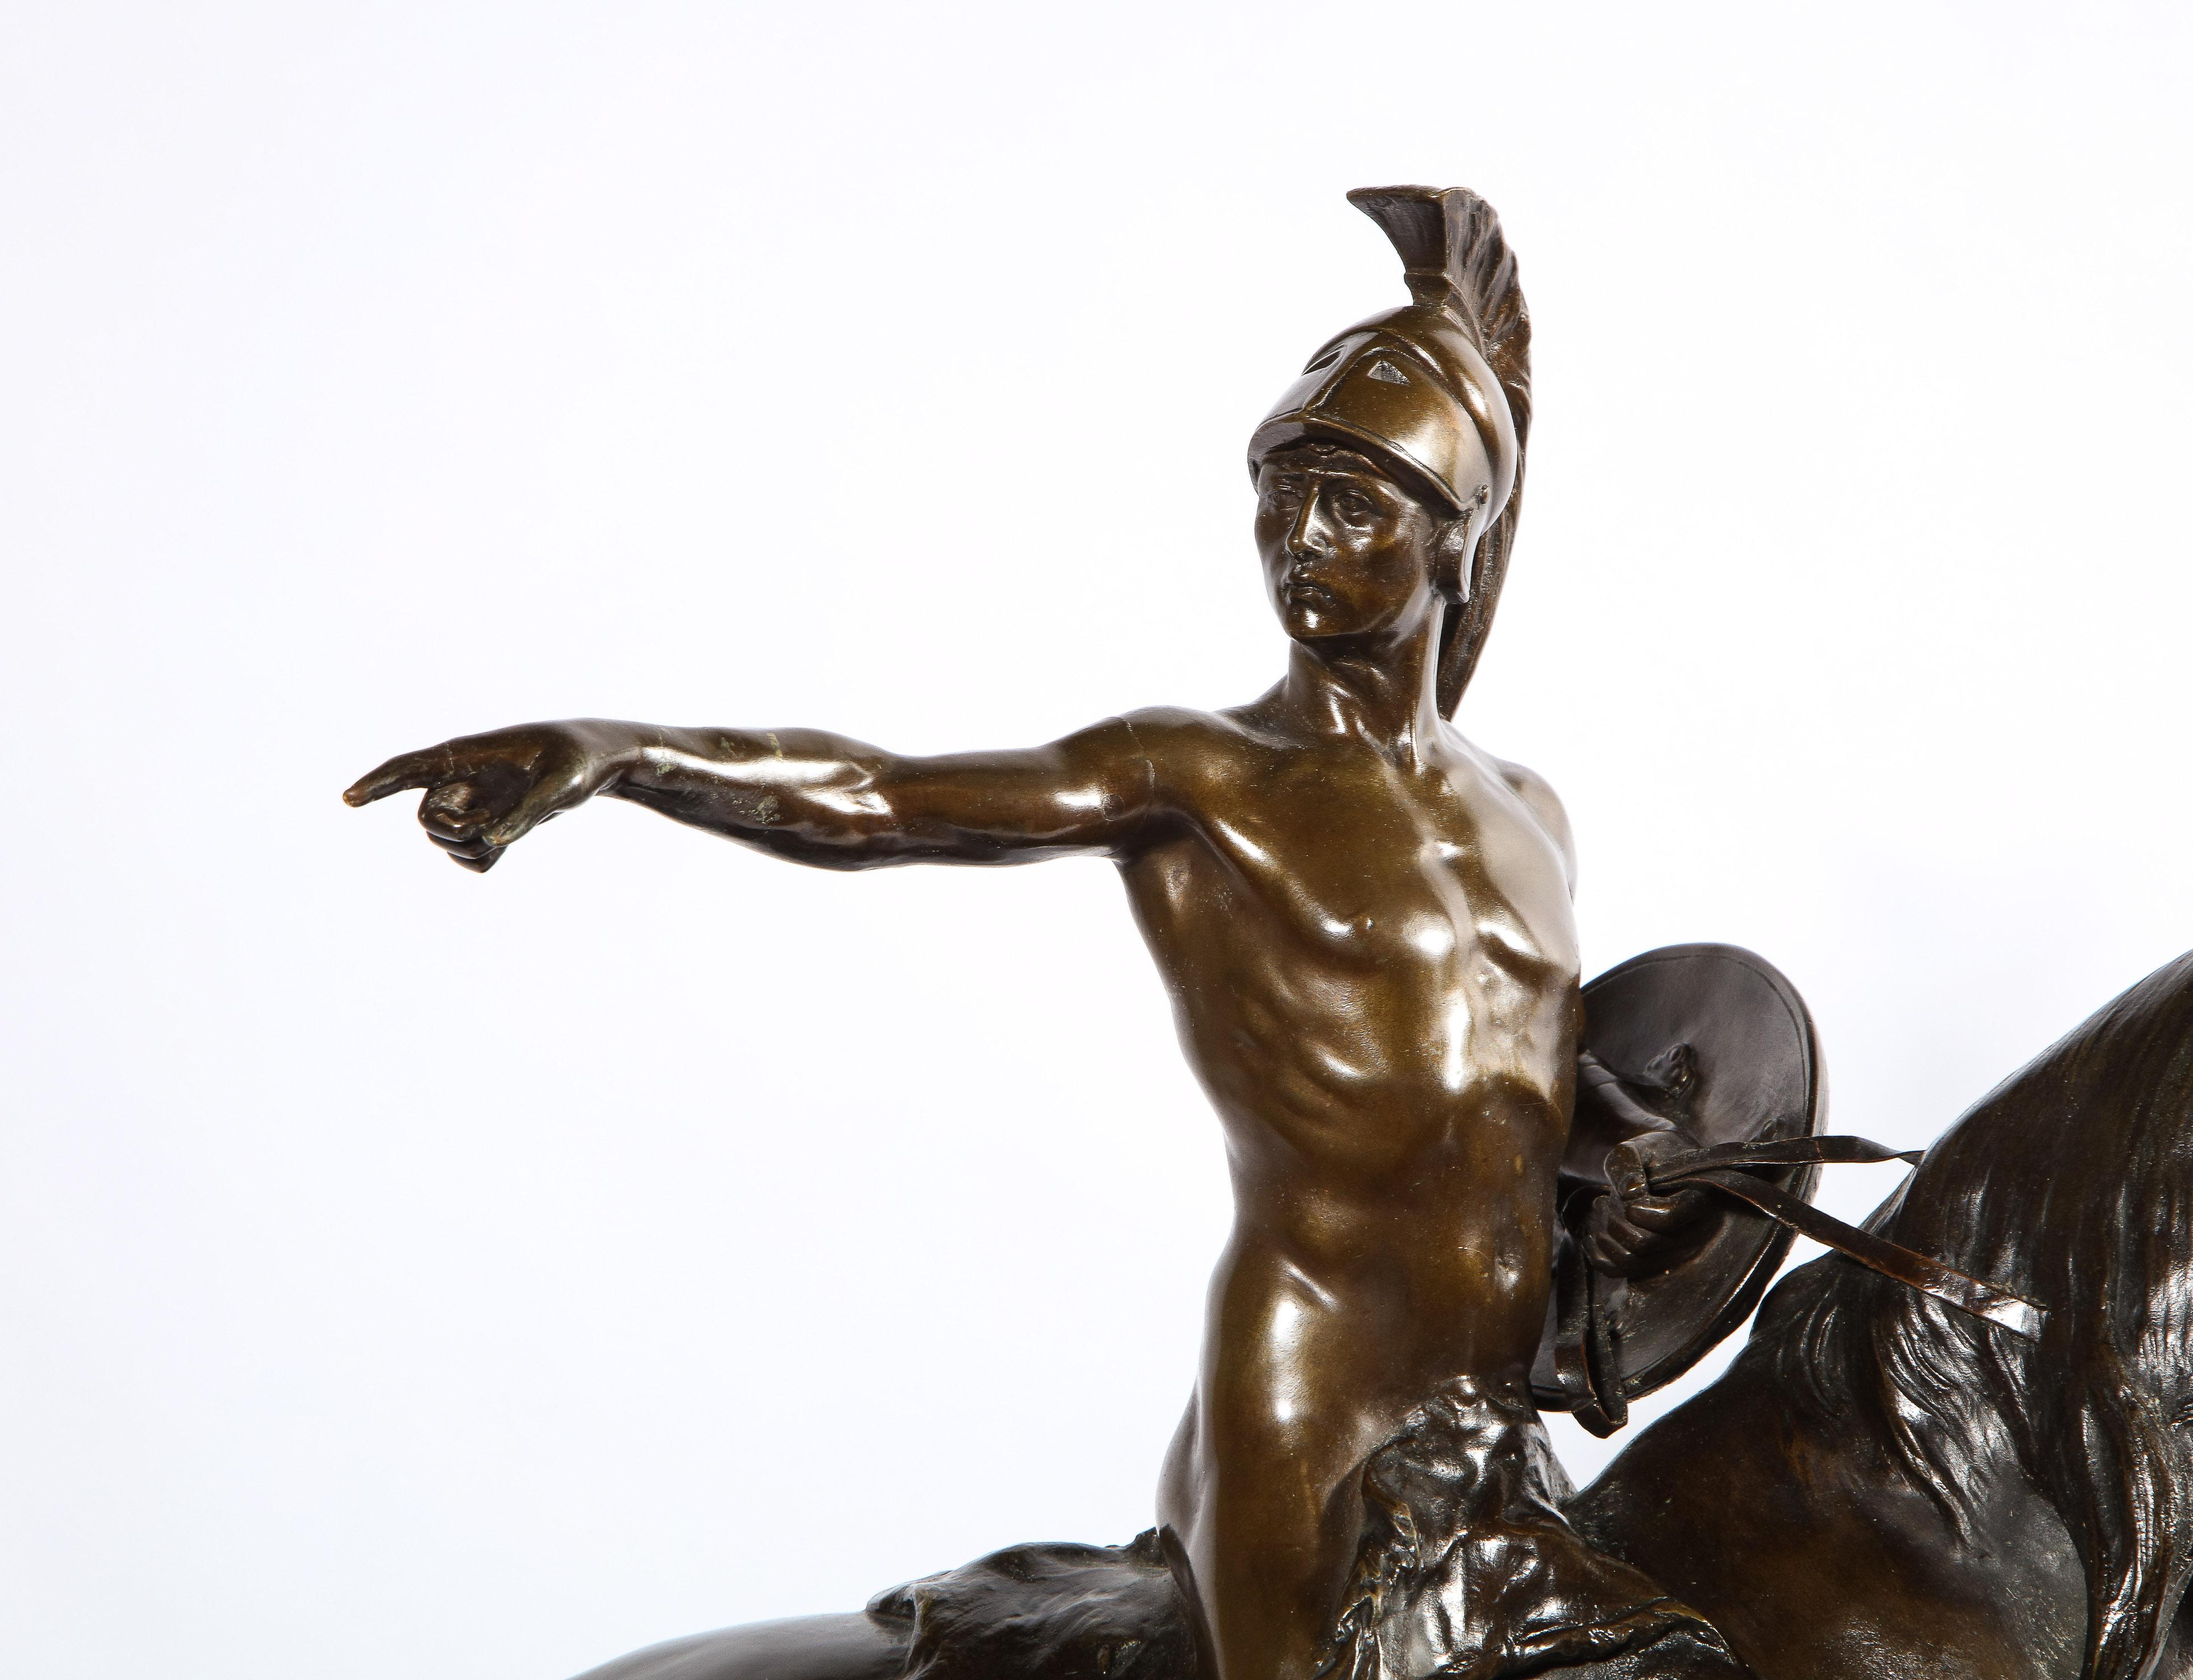 20th Century German Bronze Sculpture of Alexander the Great on a Horse by Schmidt-Felling